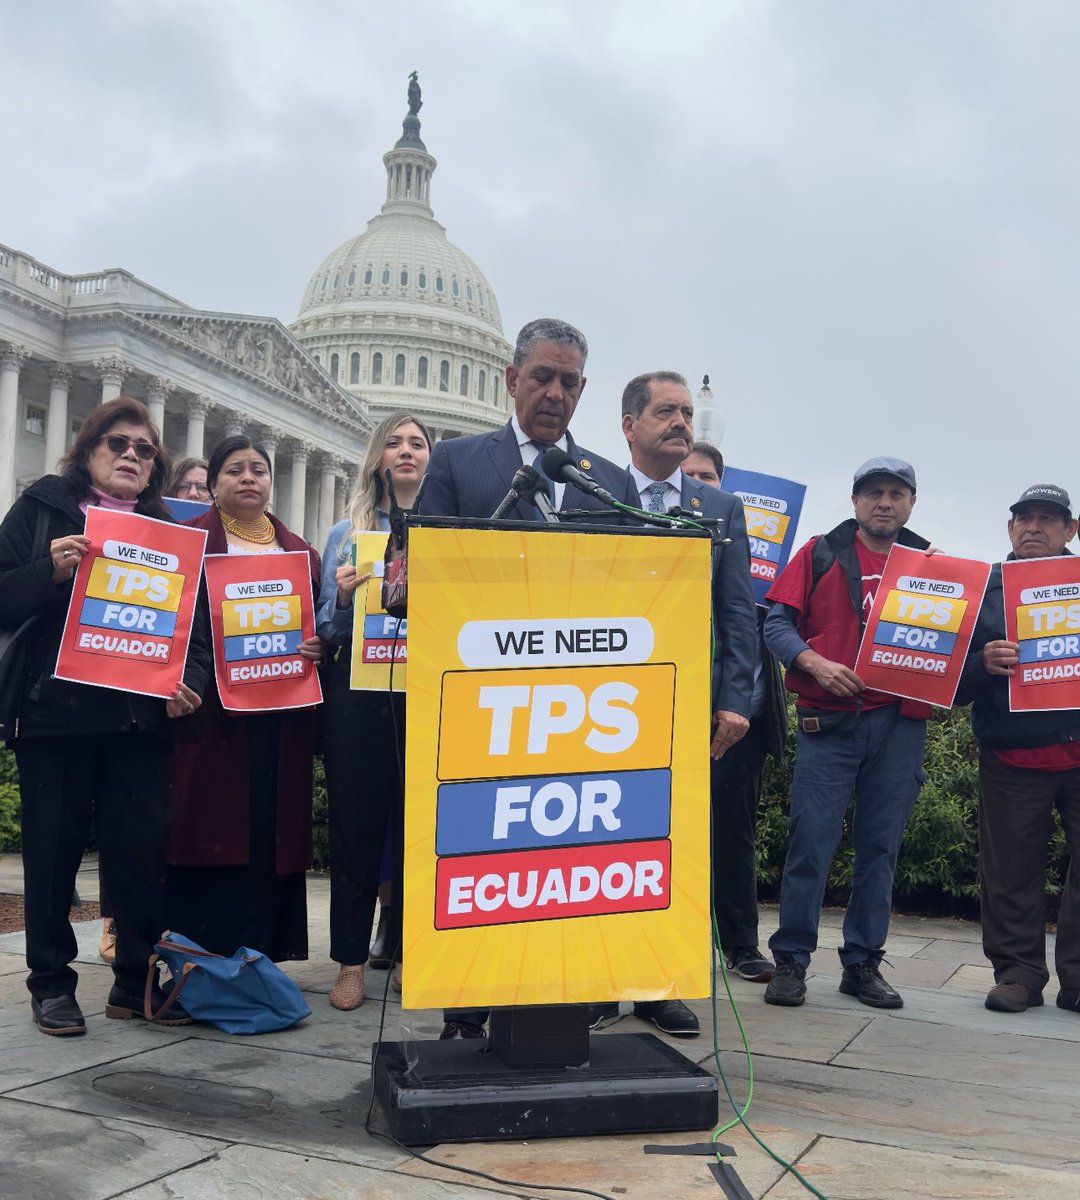 Thank you @RepEspaillat for standing with immigrant families. #TPSforEcuador will keep families together and provide access to work permits to over 300,000 Ecuadorian immigrants who have lived here for decades.